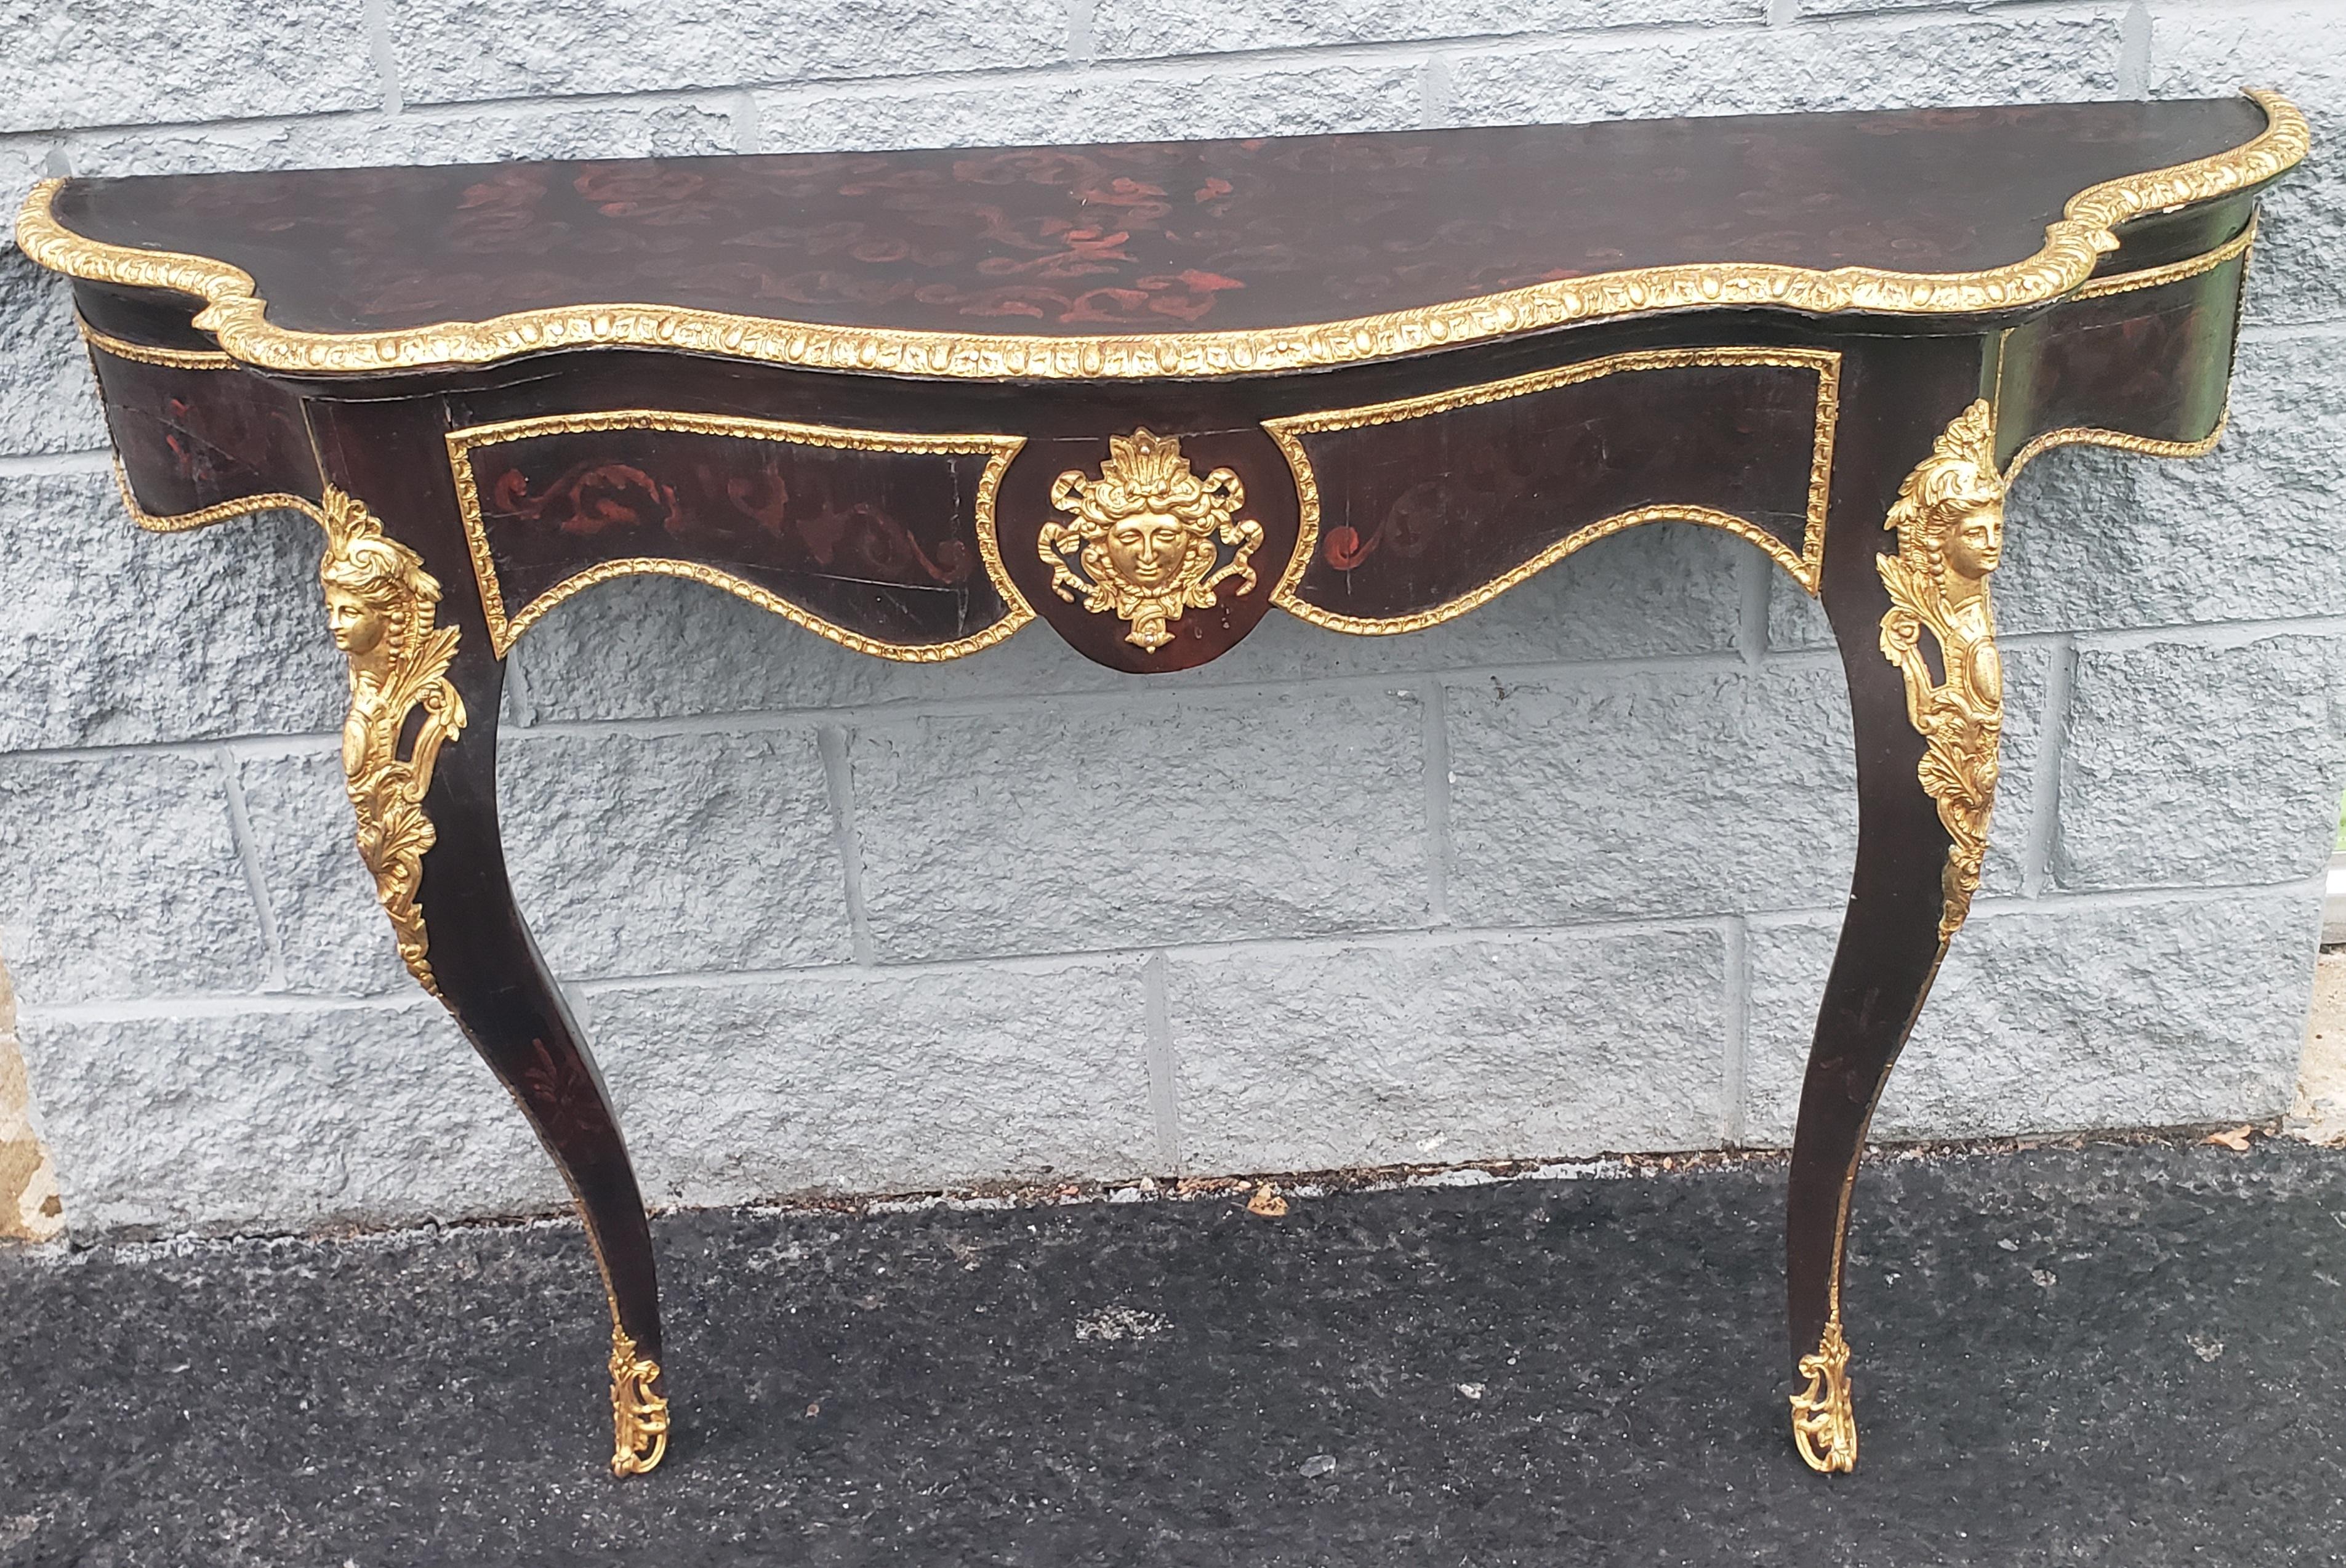 Large 51 inches, Stunning 1840s Louis Phillipe revival console wall table with Intricate giltwood work , very elegant gold bronze ormolu.
Old black Painted. Good antique condition. Wear appropriate with history and use. Measures 51 inches in width,